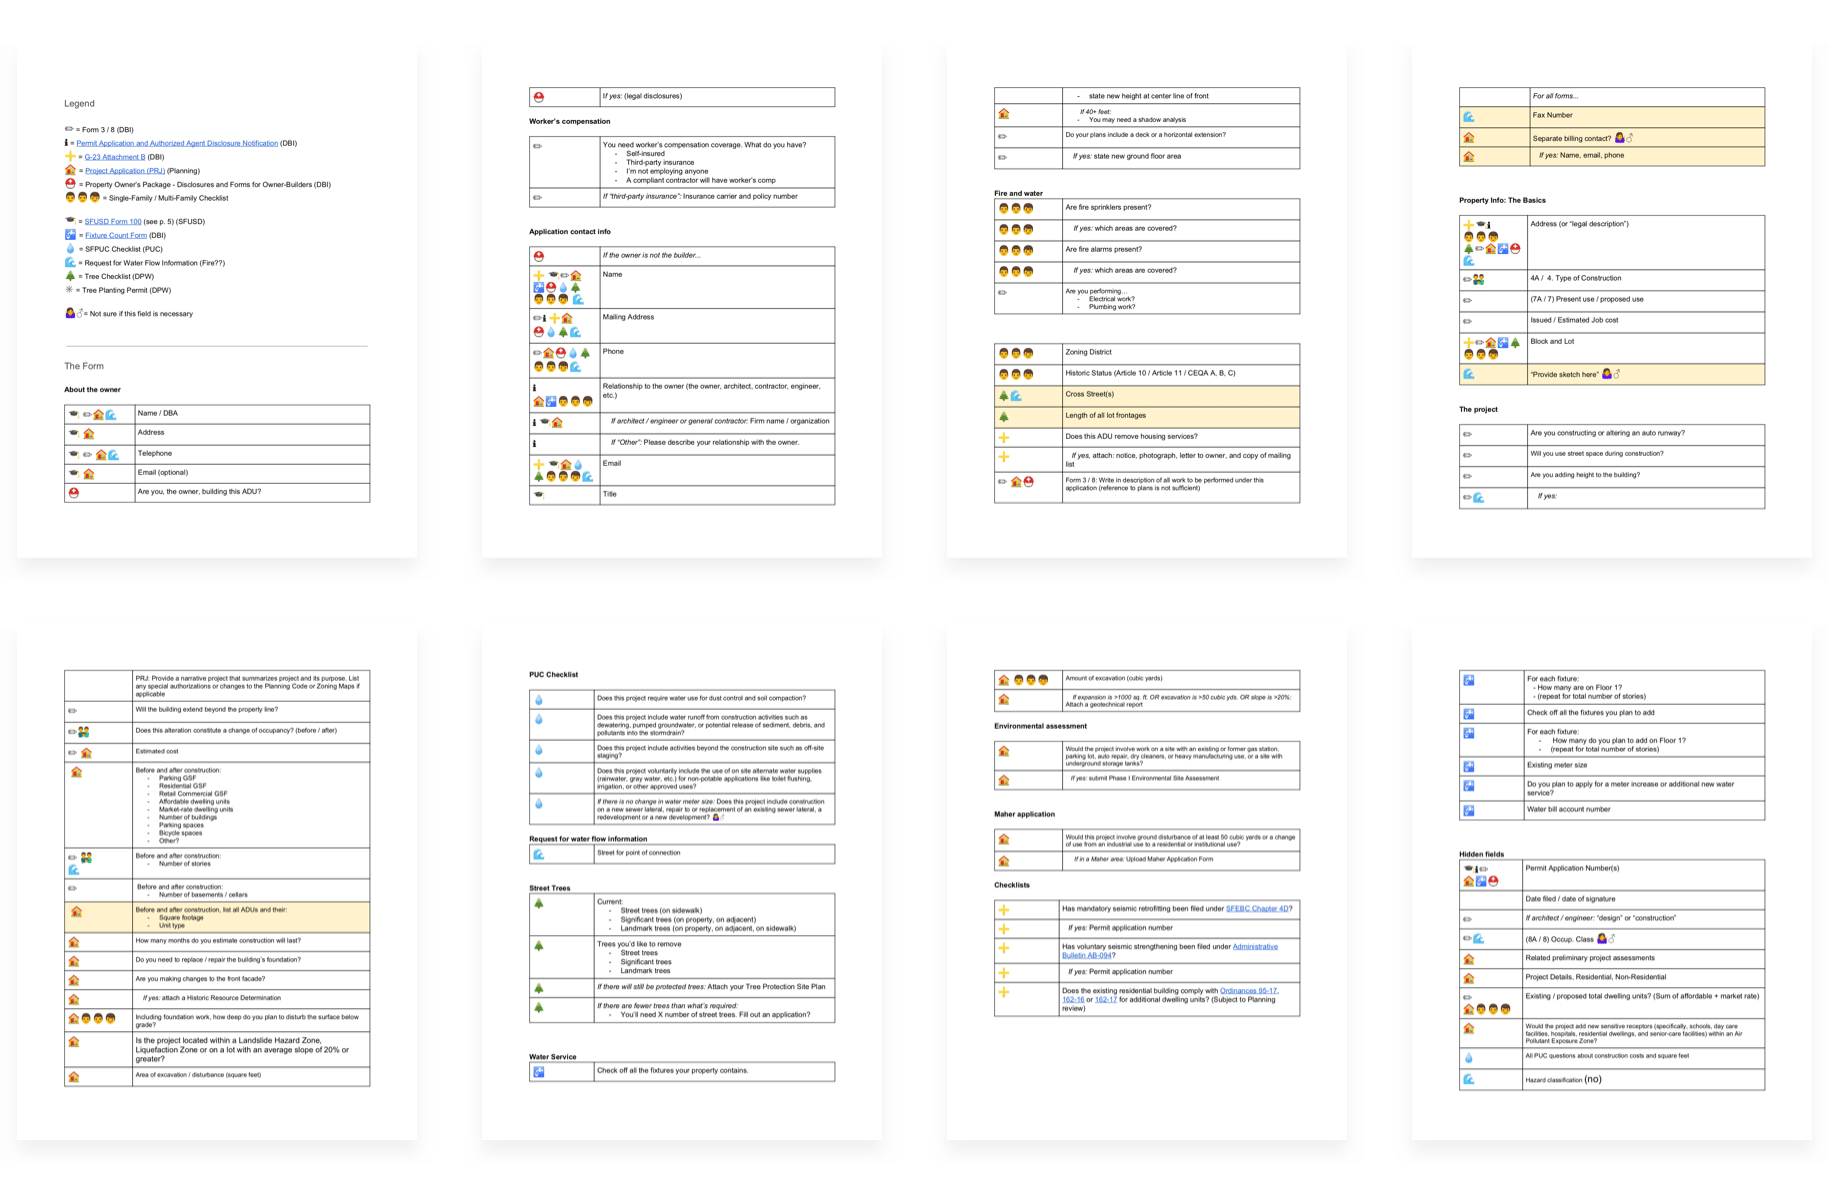 Pages from the Google Doc used for the first draft of revised content.